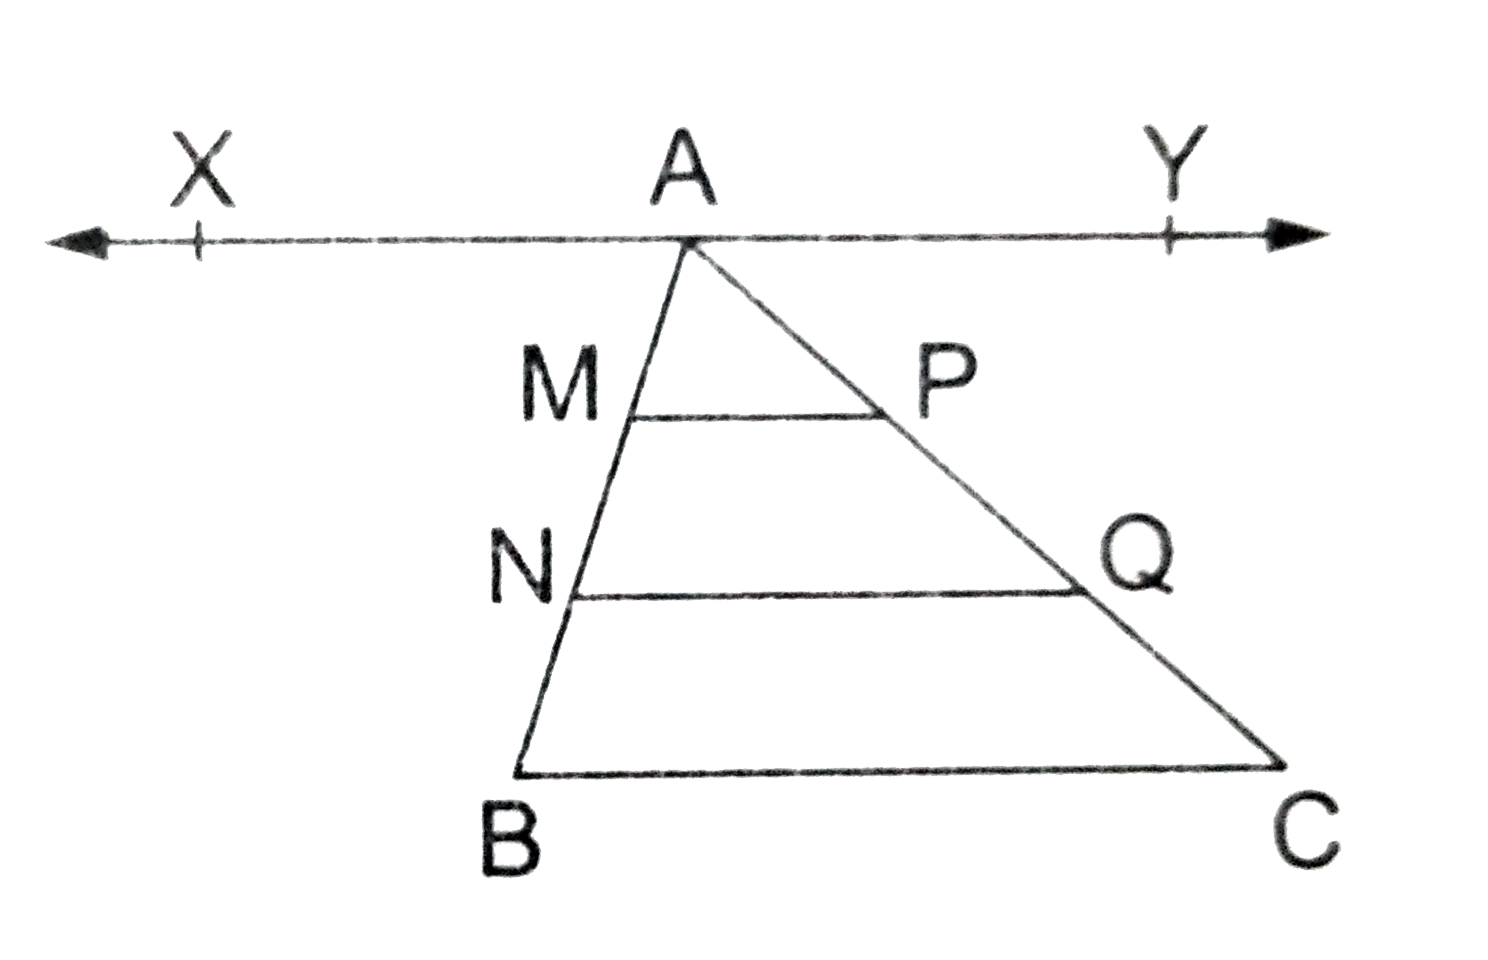 In the  adjoining figure, points M and N divide the side AB of triangle ABC   into  three equal parts. Line segments MP and NQ are both parallel to BC and meet AC in P and Q respectively. Prove that P and Q divide AC into three equal parts.